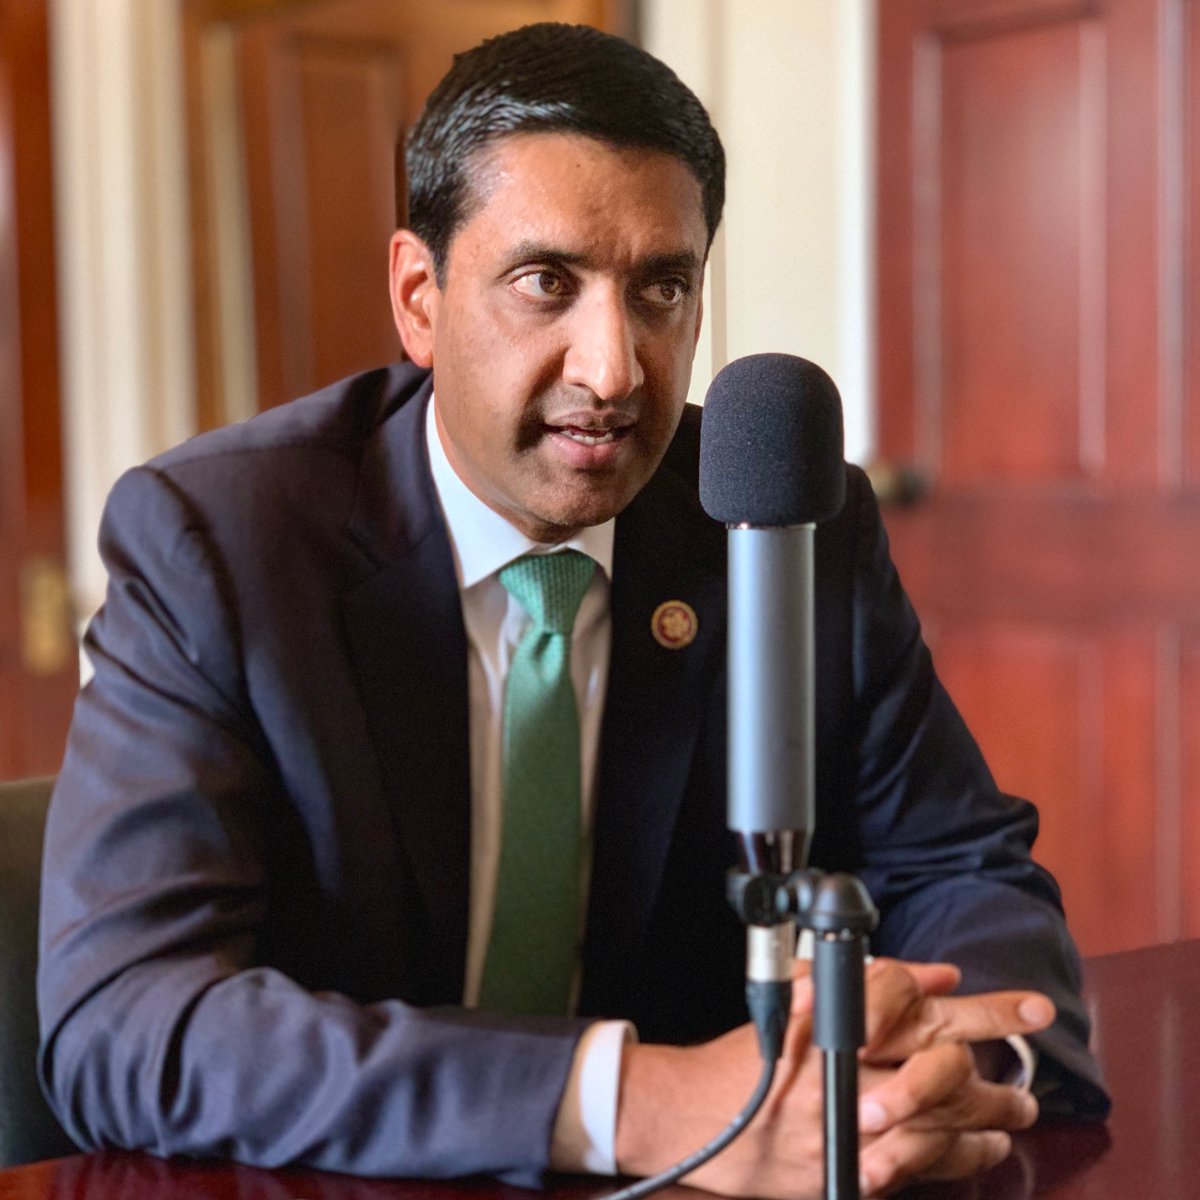 We went to the US Capitol building to hear from  @RepRoKhanna (D-CA-17) about the bipartisan legislation that he drafted with  @RepMattGaetz to prevent a war with  #Iran.  @RepRoKhanna also explained what an impeachment inquiry means for national security.  https://soundcloud.com/user-954653529/the-impeachment-edition